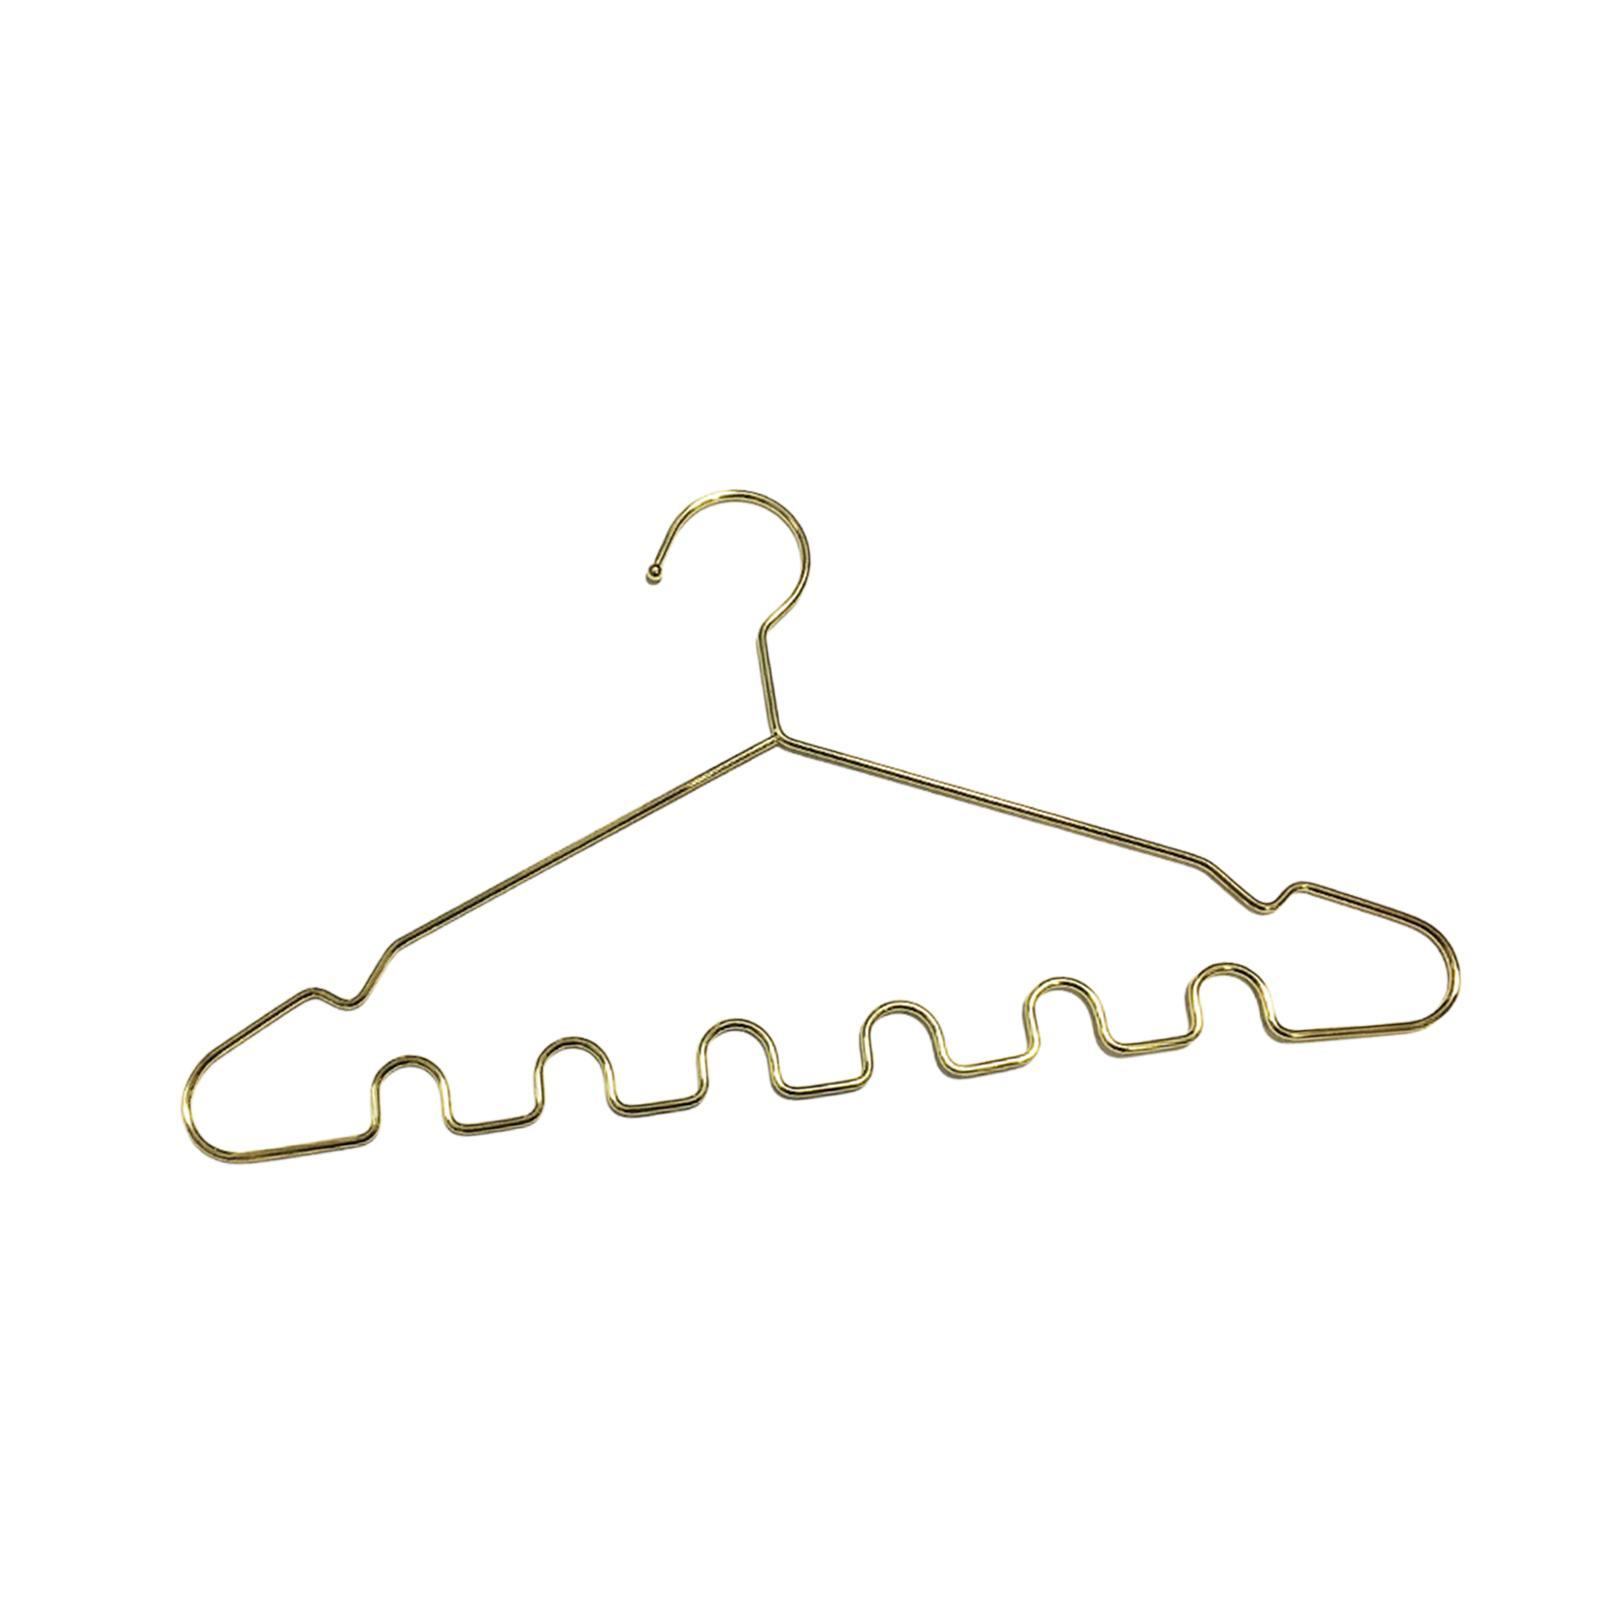 Space Saving Wardrobe Hangers Heavy Duty with Shoulder Grooves for Dresses